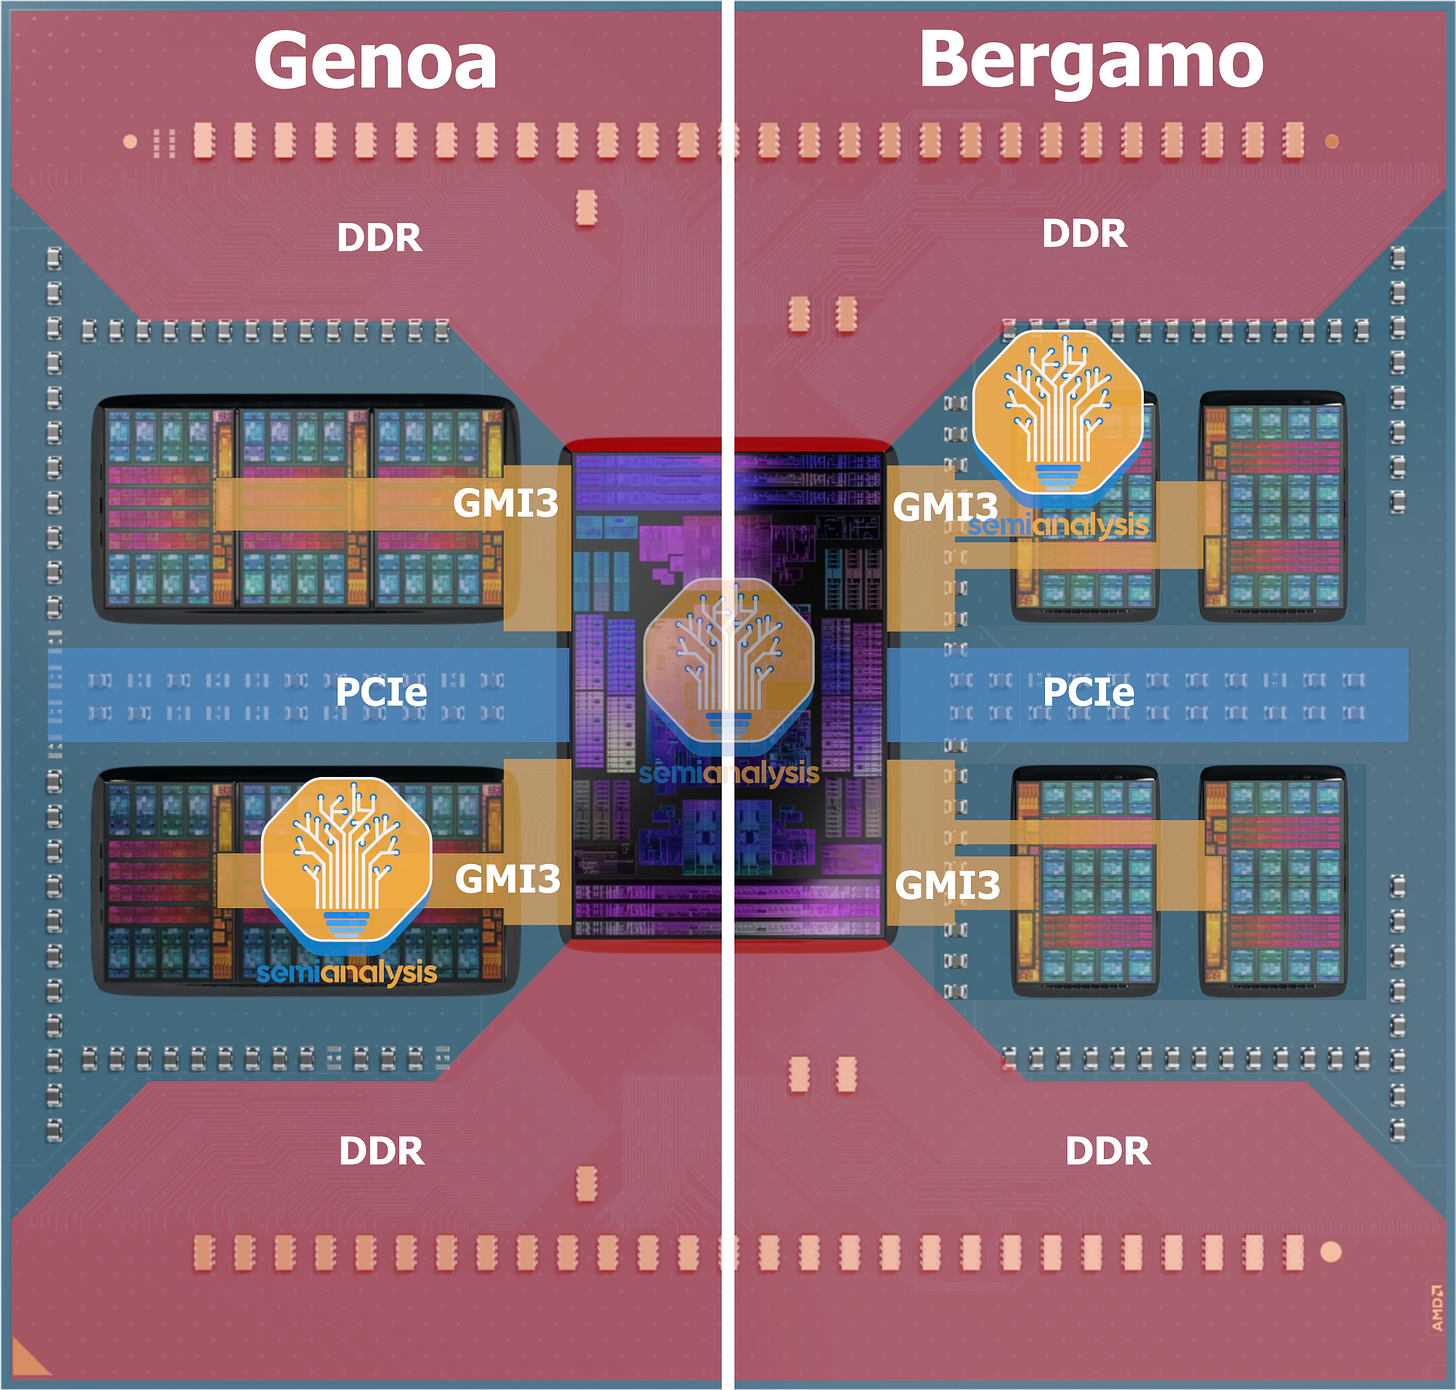 Intel proposes x86S, a 64-bit CPU microarchitecture that does away with  legacy 16-bit and 32-bit support